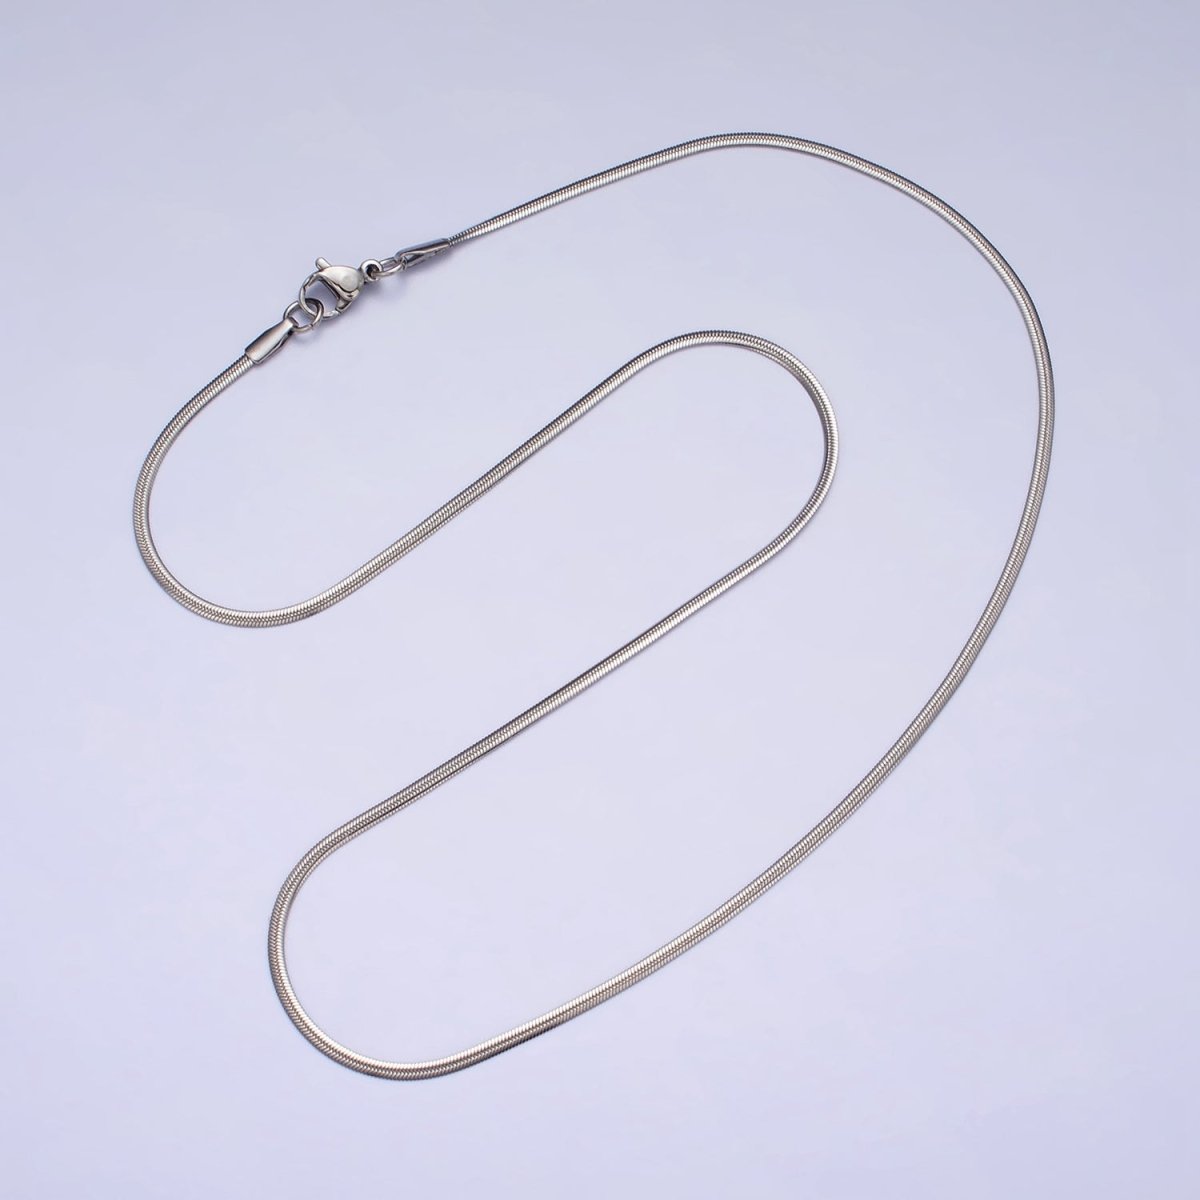 Herringbone Necklace in Gold Stainless Steel Snake Chain 17.75 inch Dainty Ready to Wear Chain for Minimalist Jewelry | WA-1548 WA-1549 Clearance Pricing - DLUXCA